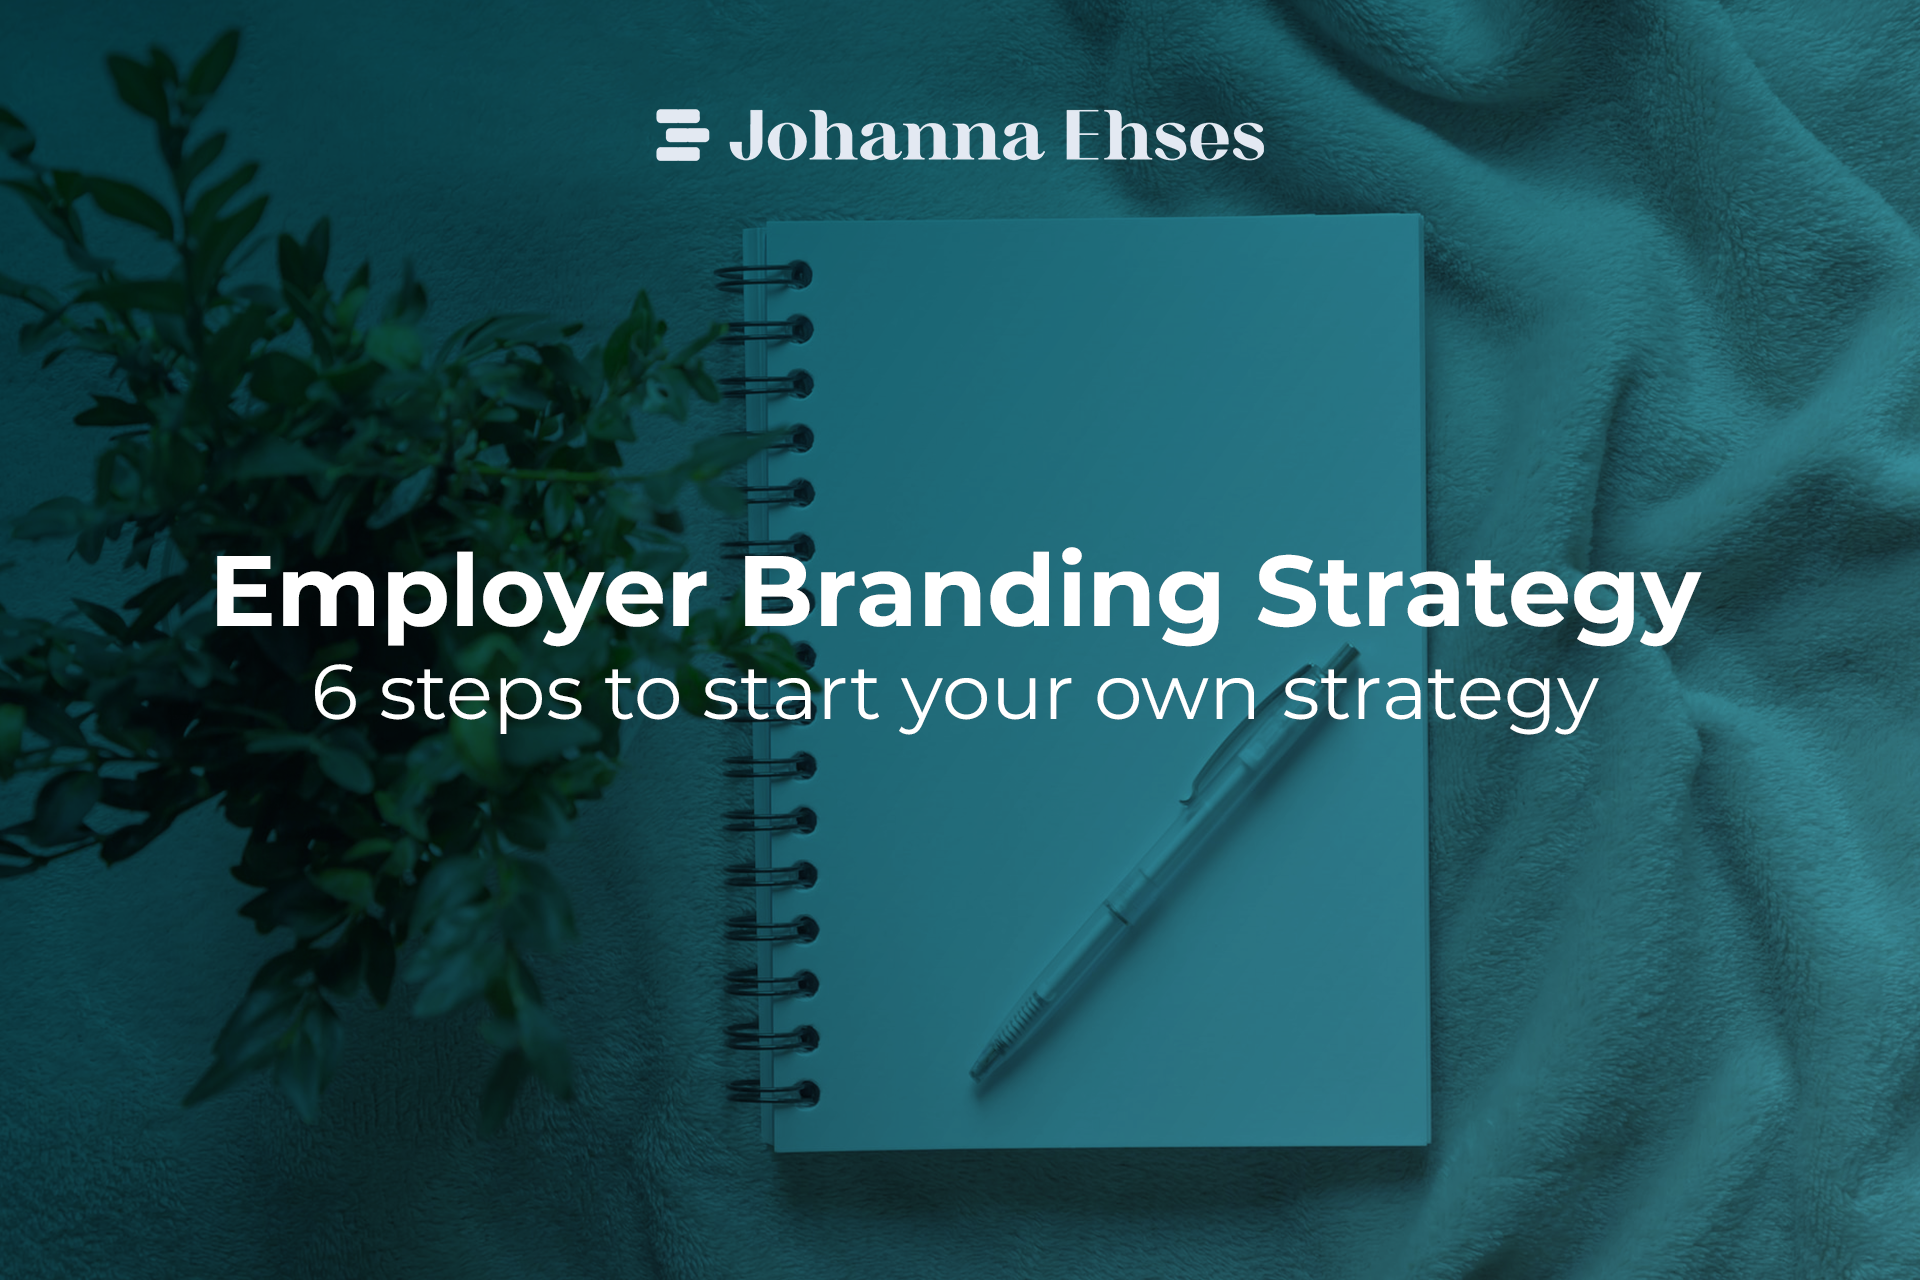 Employer Branding Strategy - 6 Steps to start your strategy